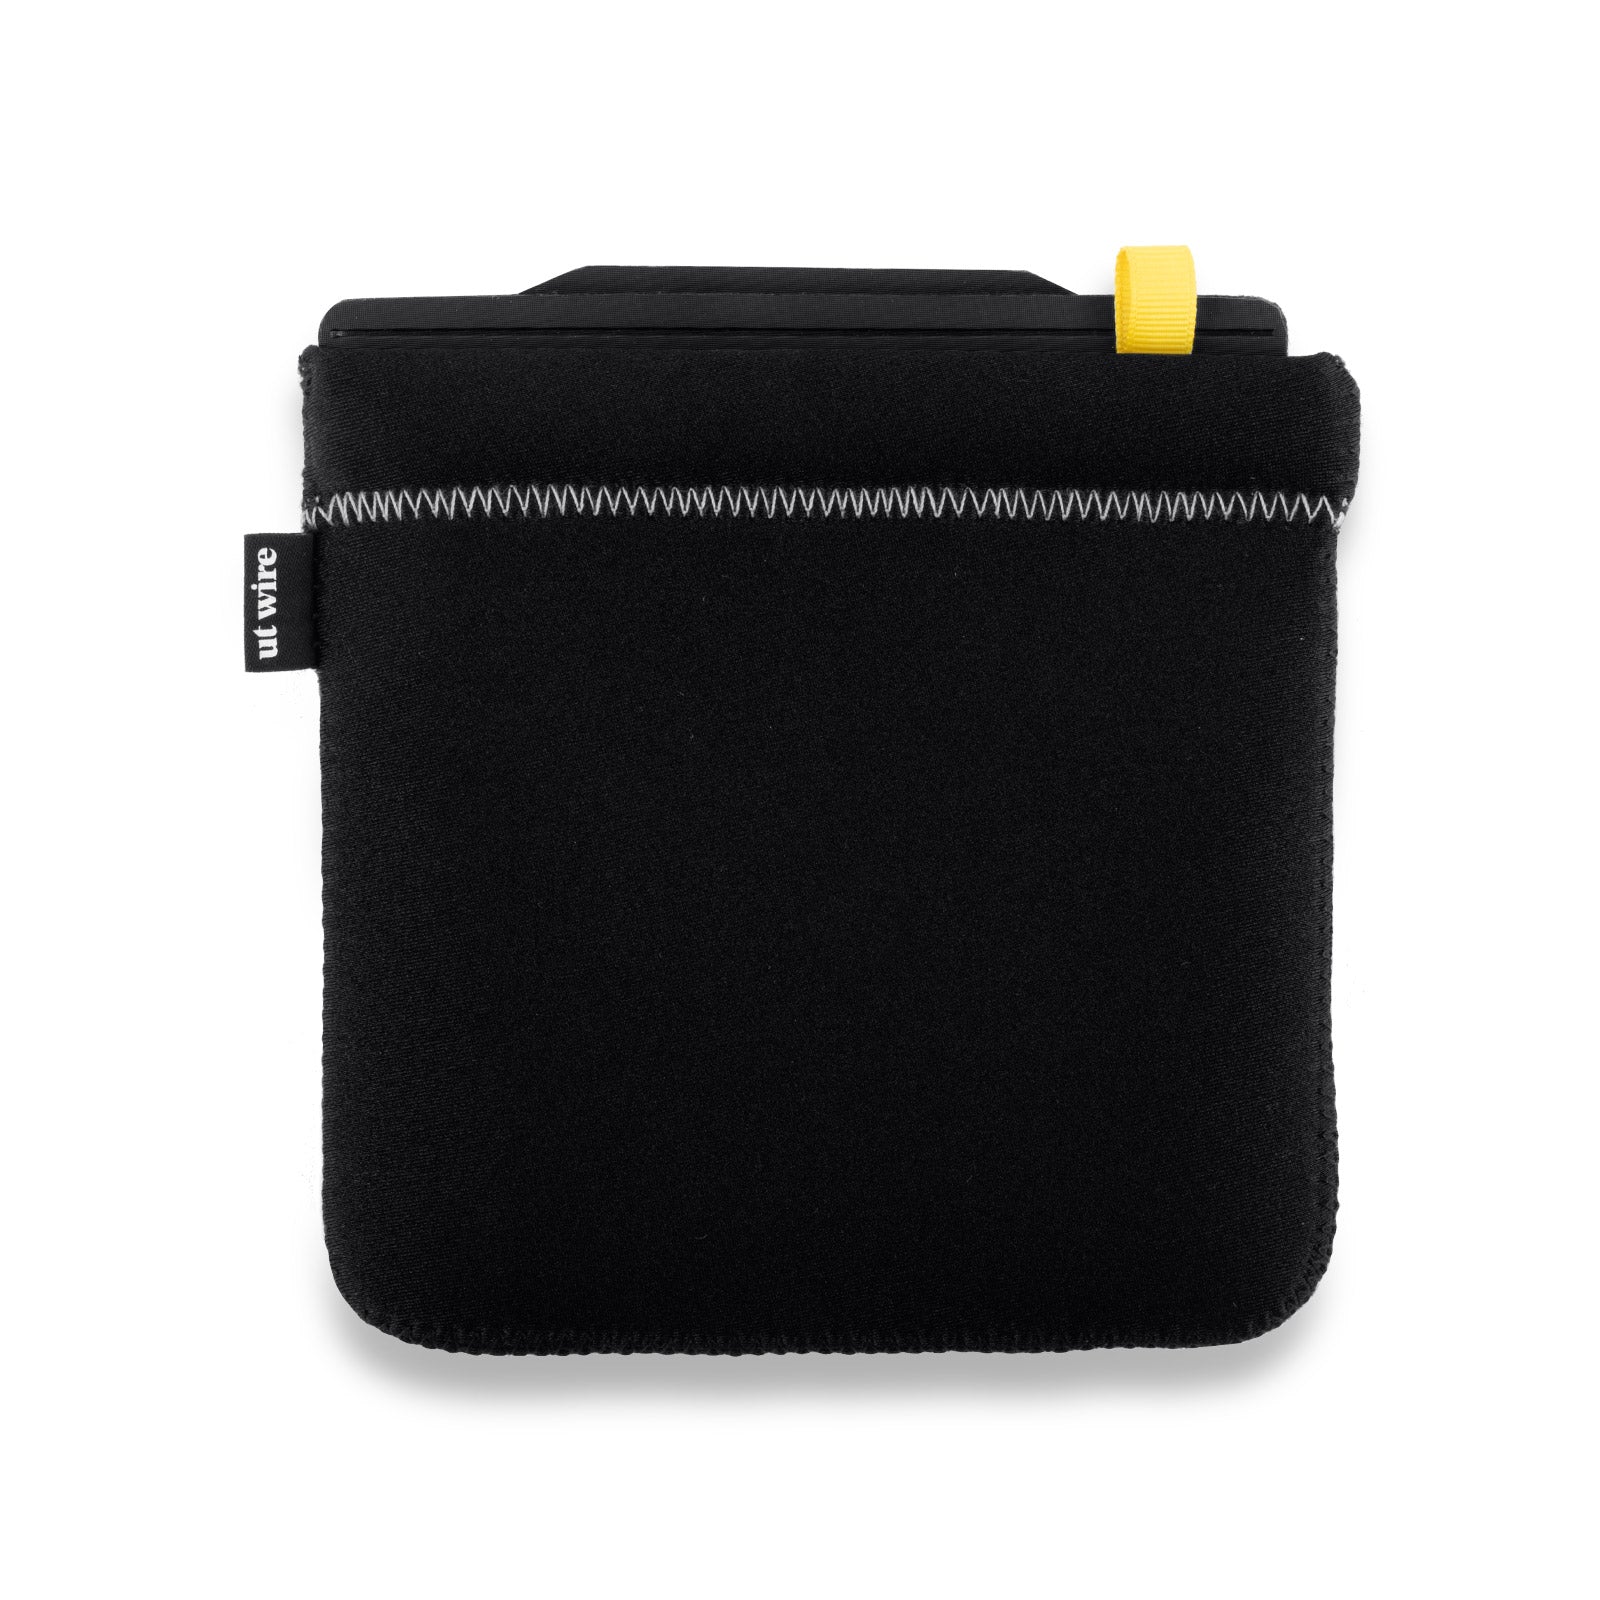 Pocket for Tech Accessories